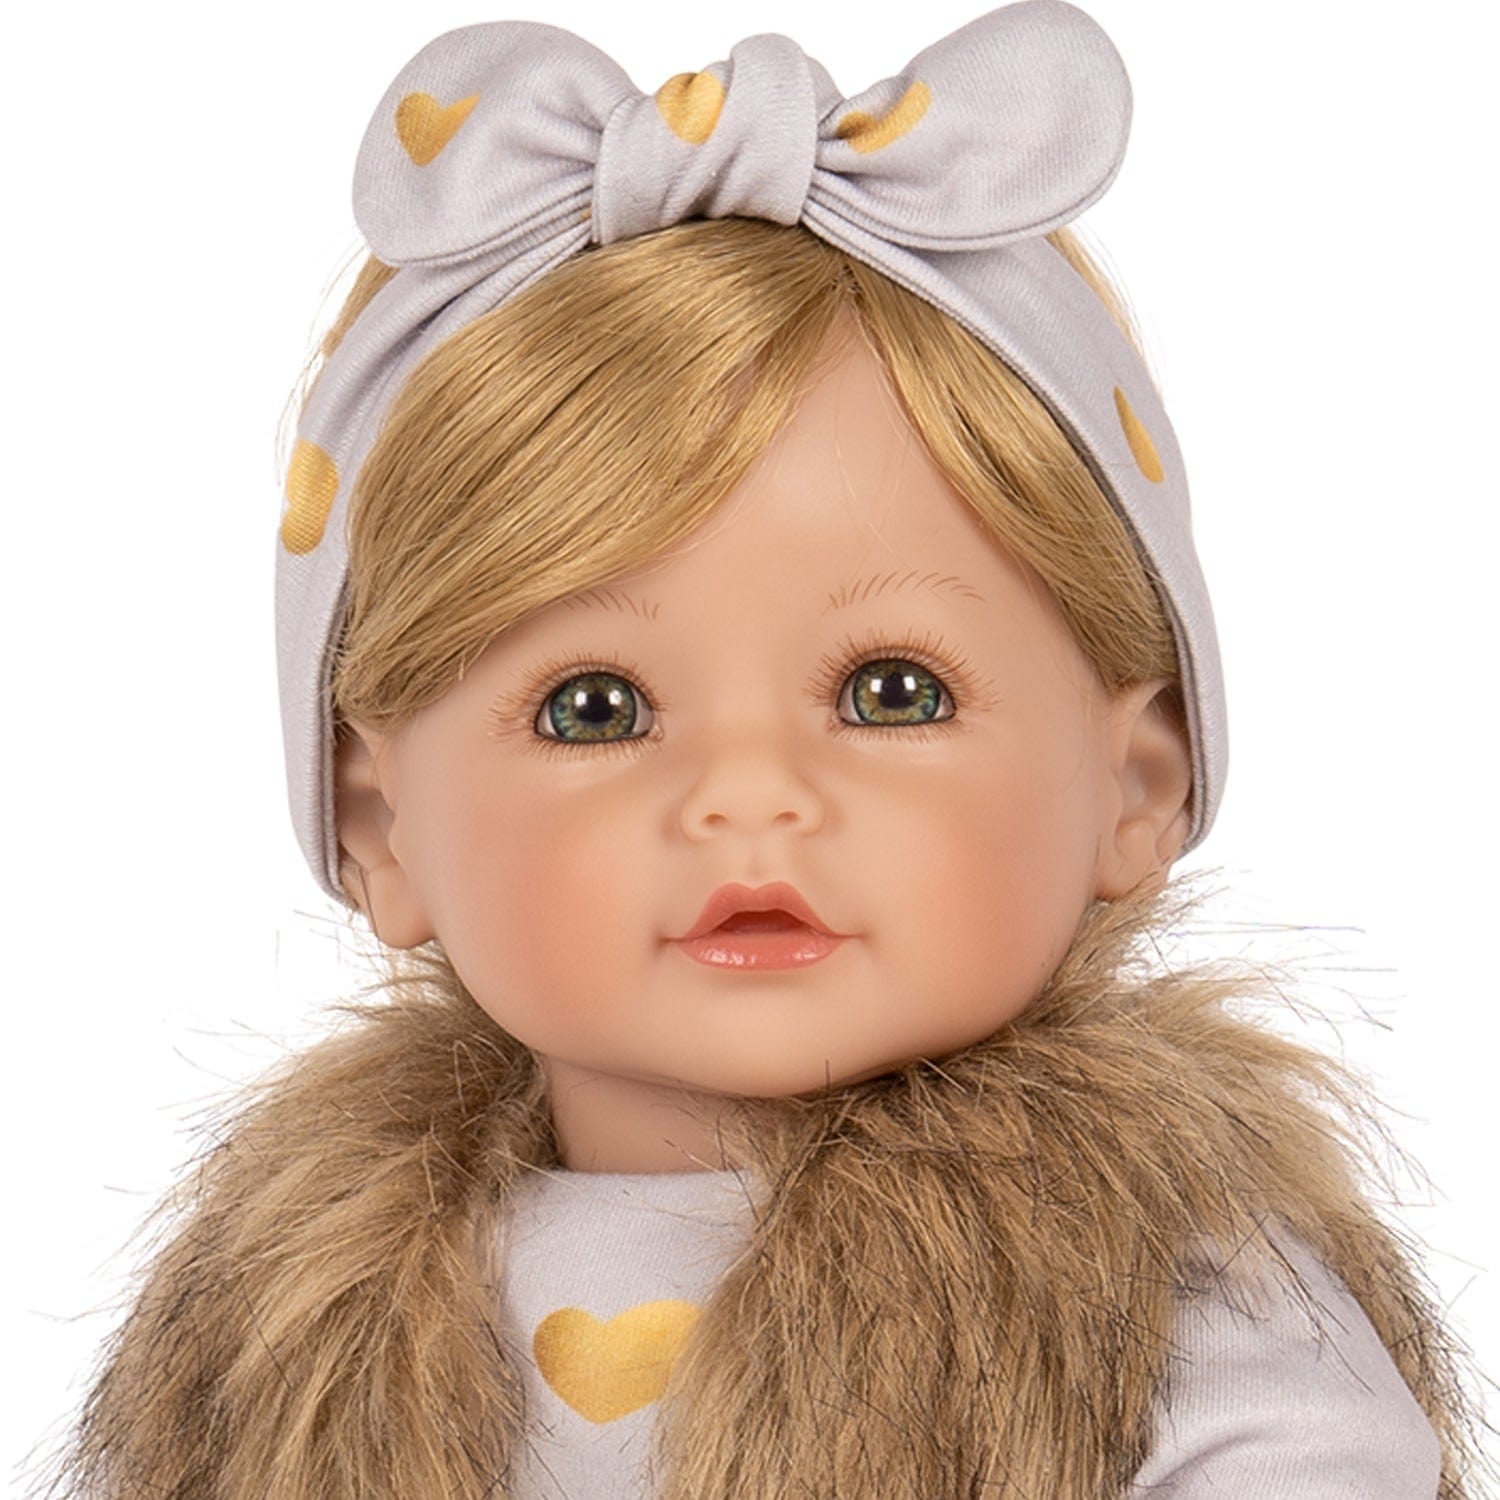 Adora Realistic Toddler Baby Doll Baby Glam - 20 inches